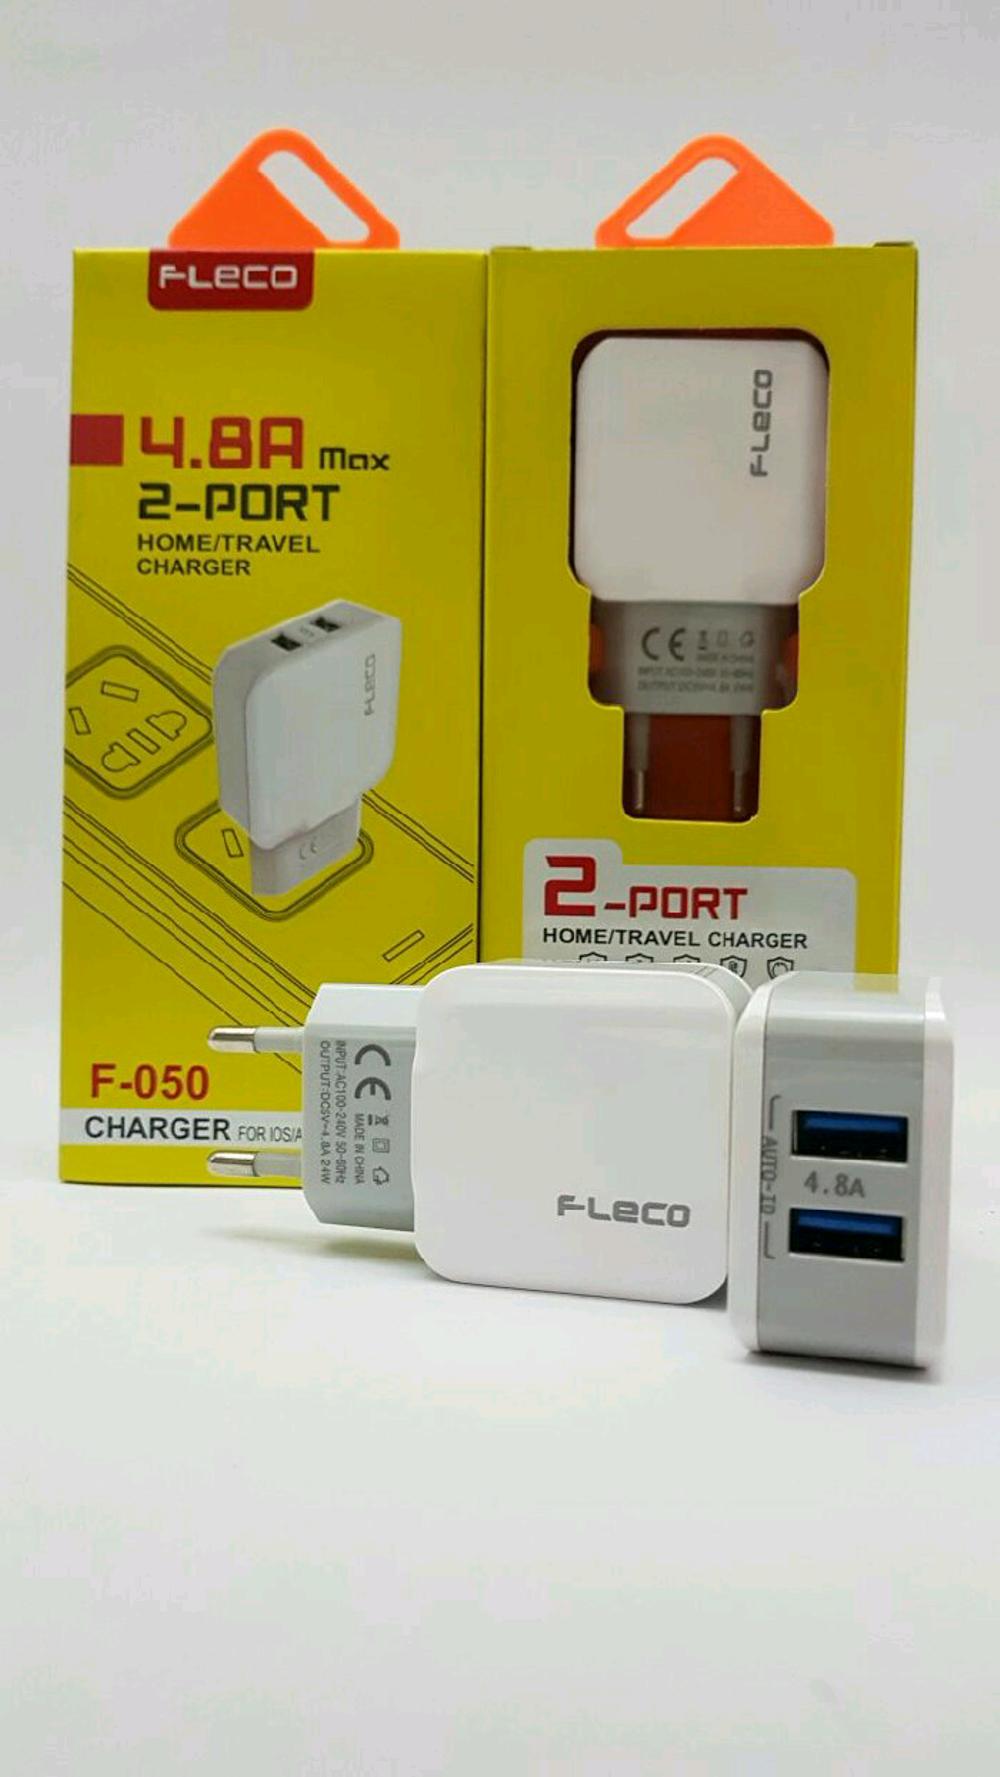 Travel Charger Original 2,4a. A50 Charger.